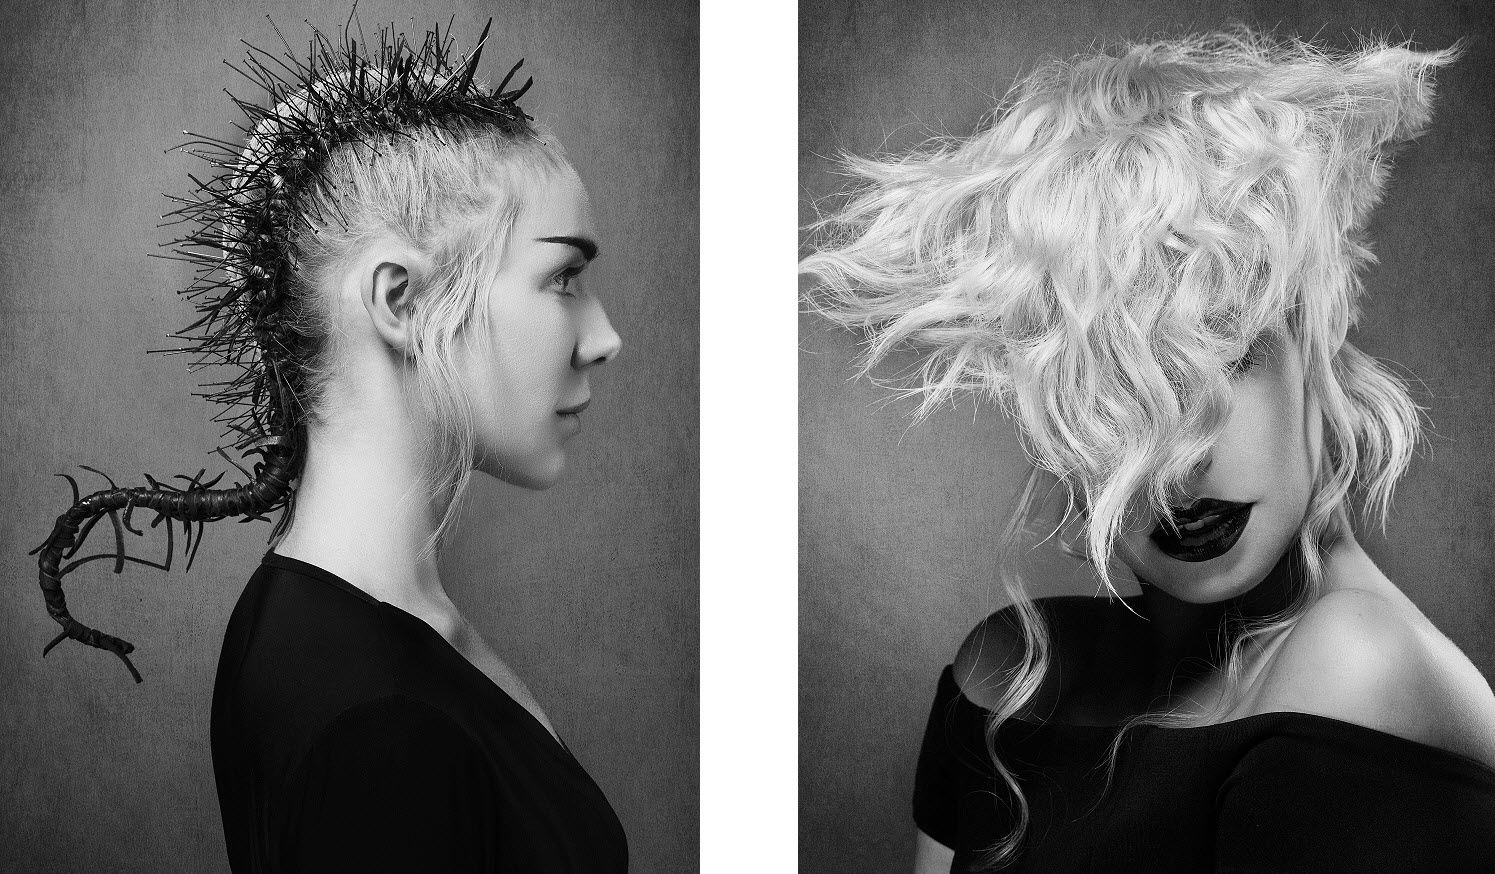 NAHA 2019 Finalists: Team of the Year